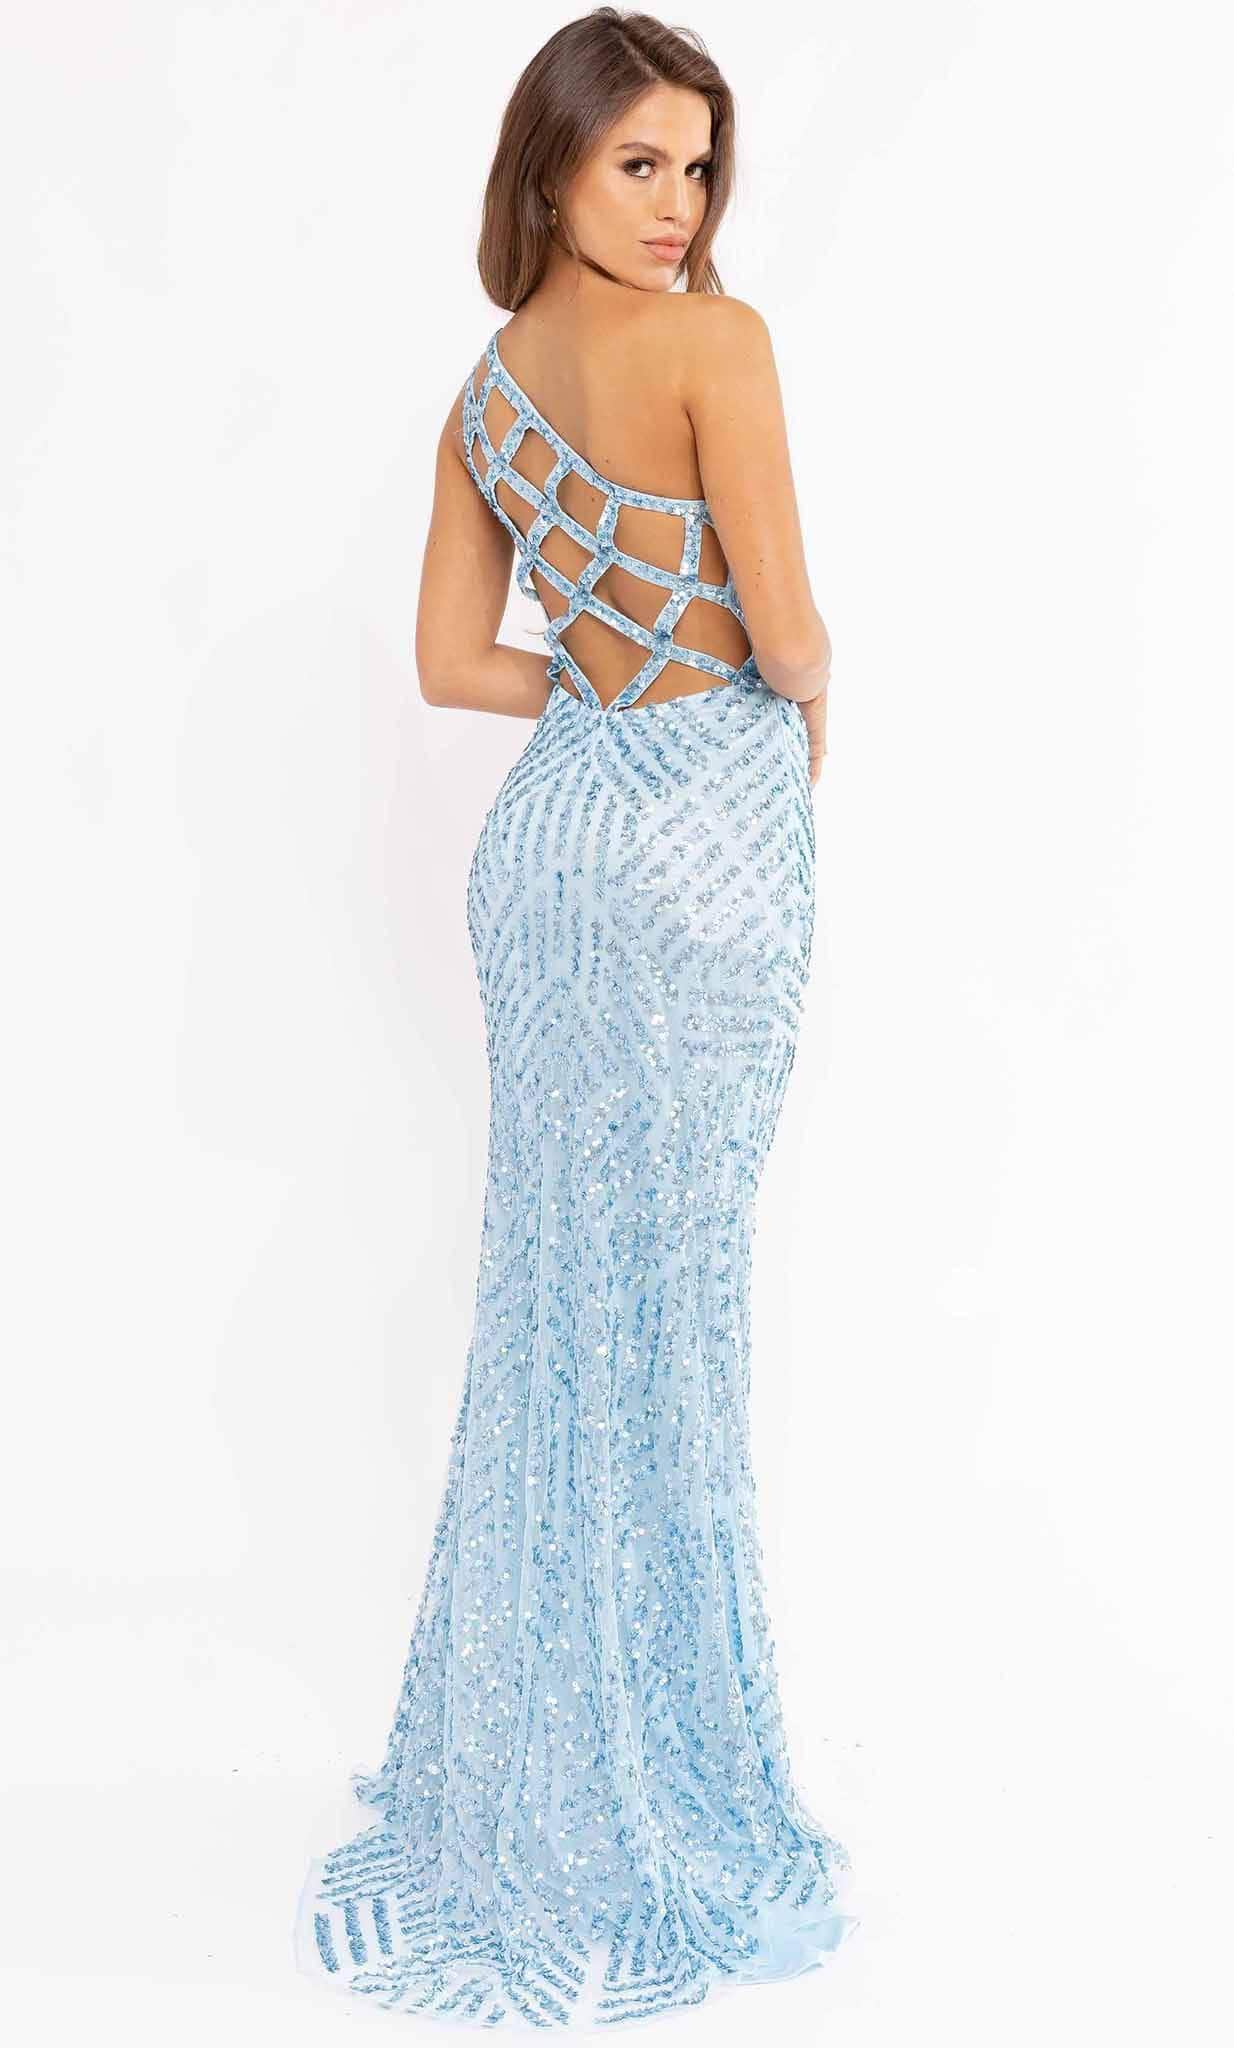 Primavera Couture 3951 - Sequined Cutout Back Prom Gown Special Occasion Dress